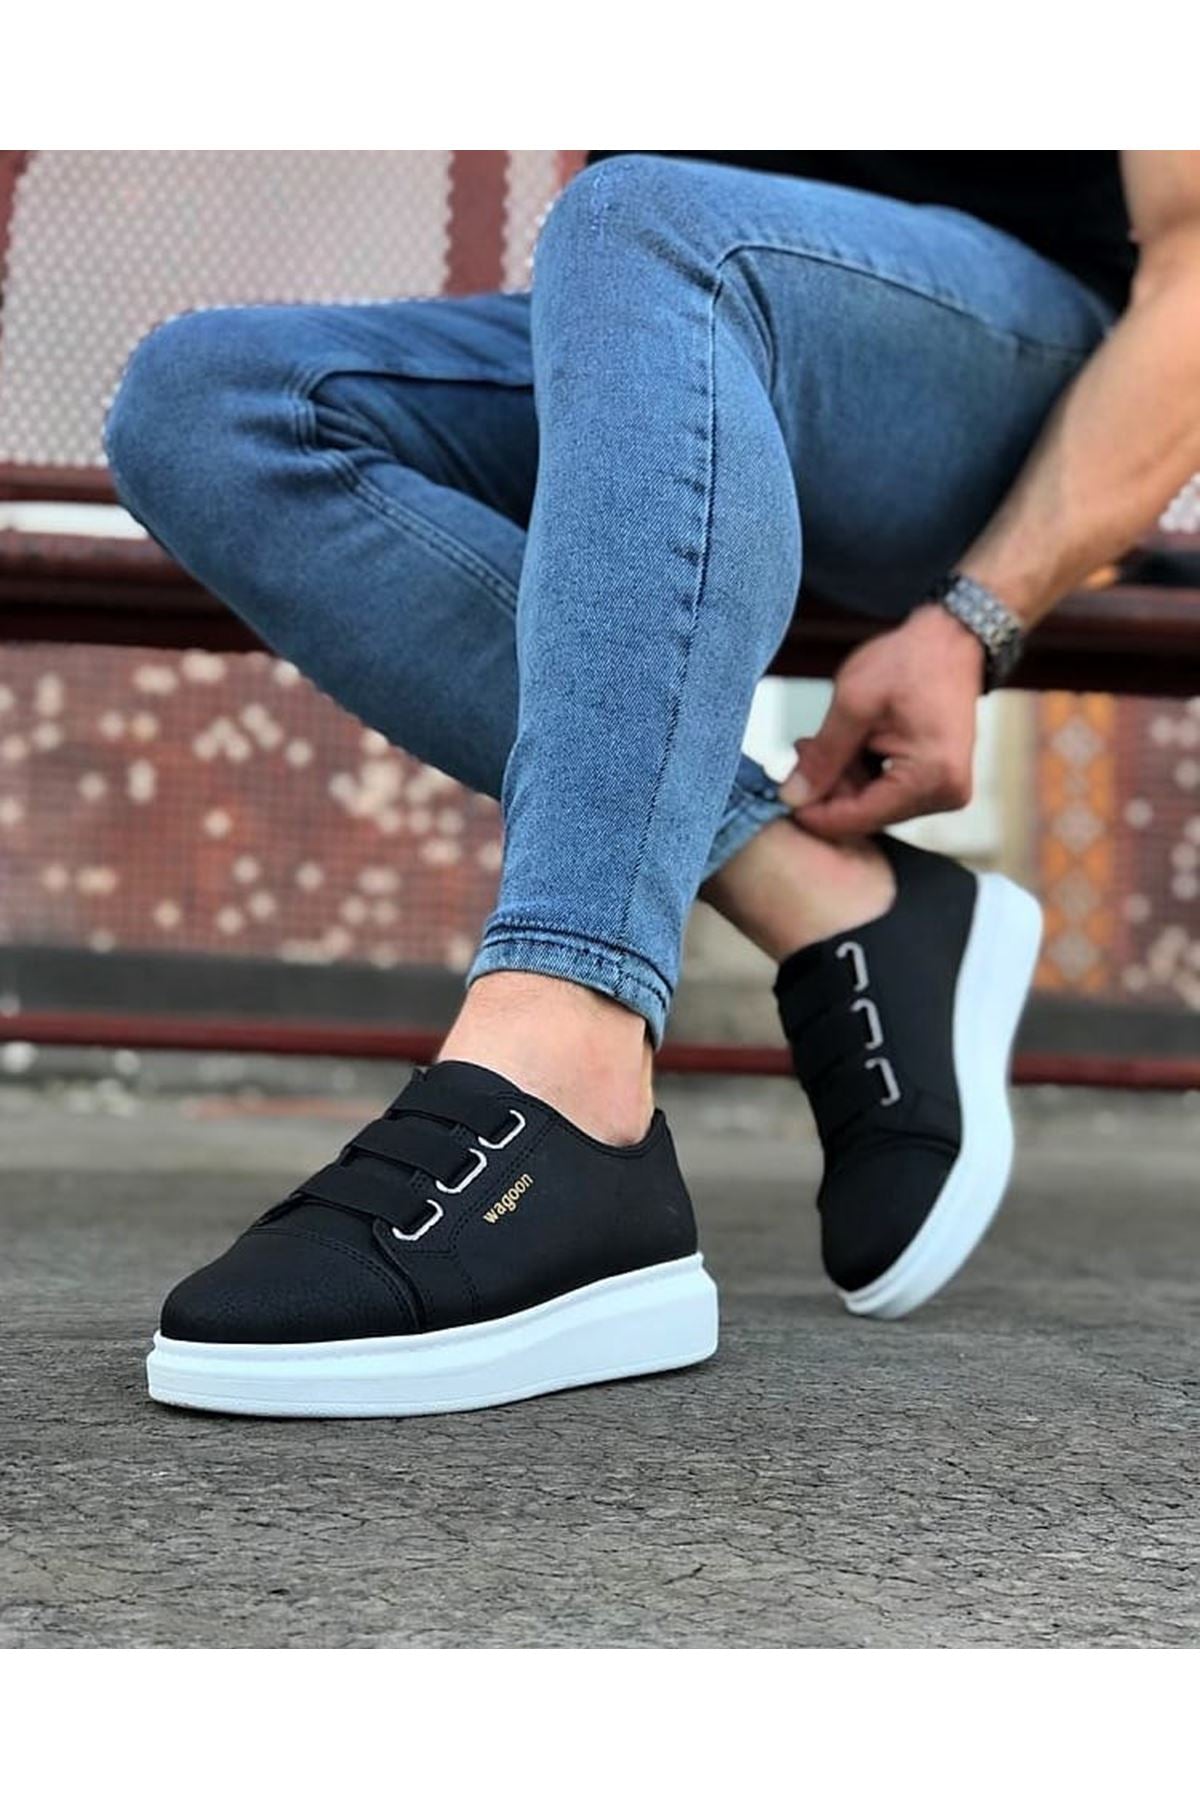 WG026 3 Band Black Thick Sole Casual Men's Shoes - STREETMODE™